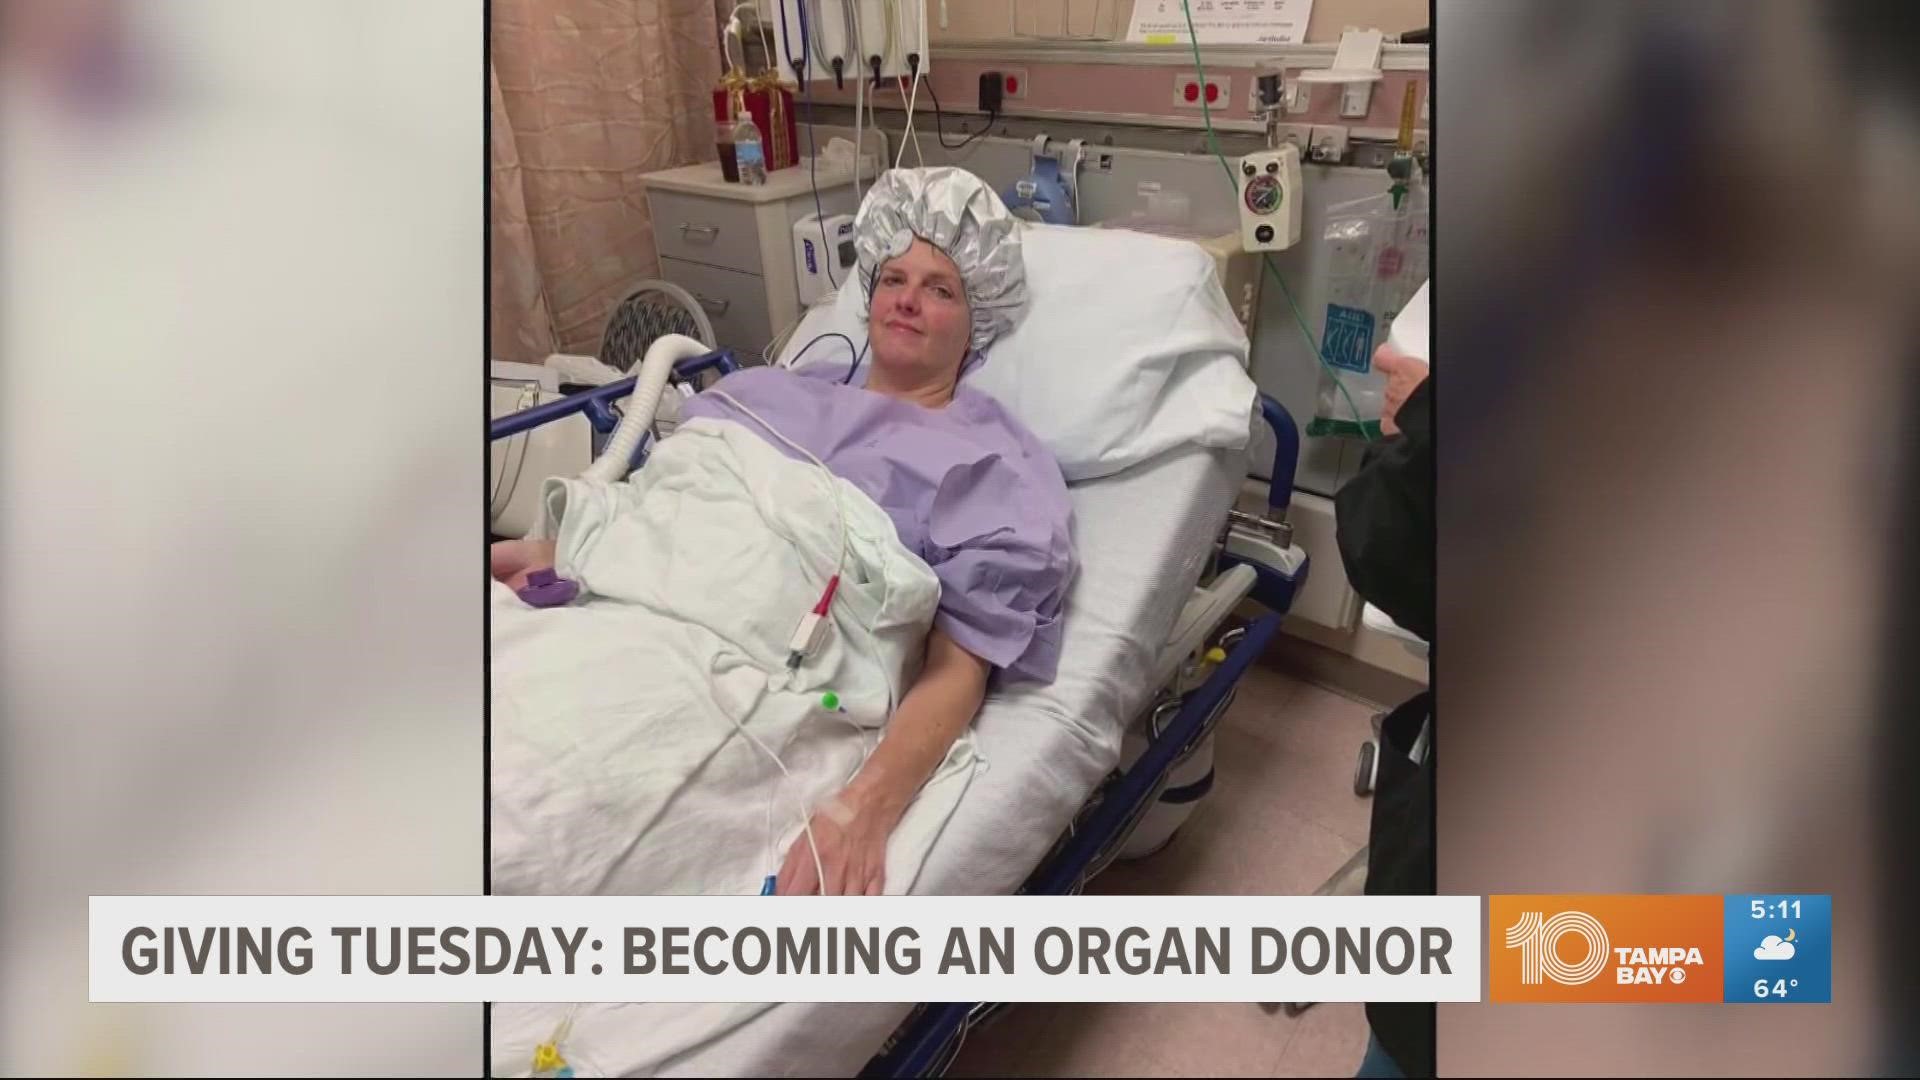 More than 100,000 people in America are waiting for an organ transplant.